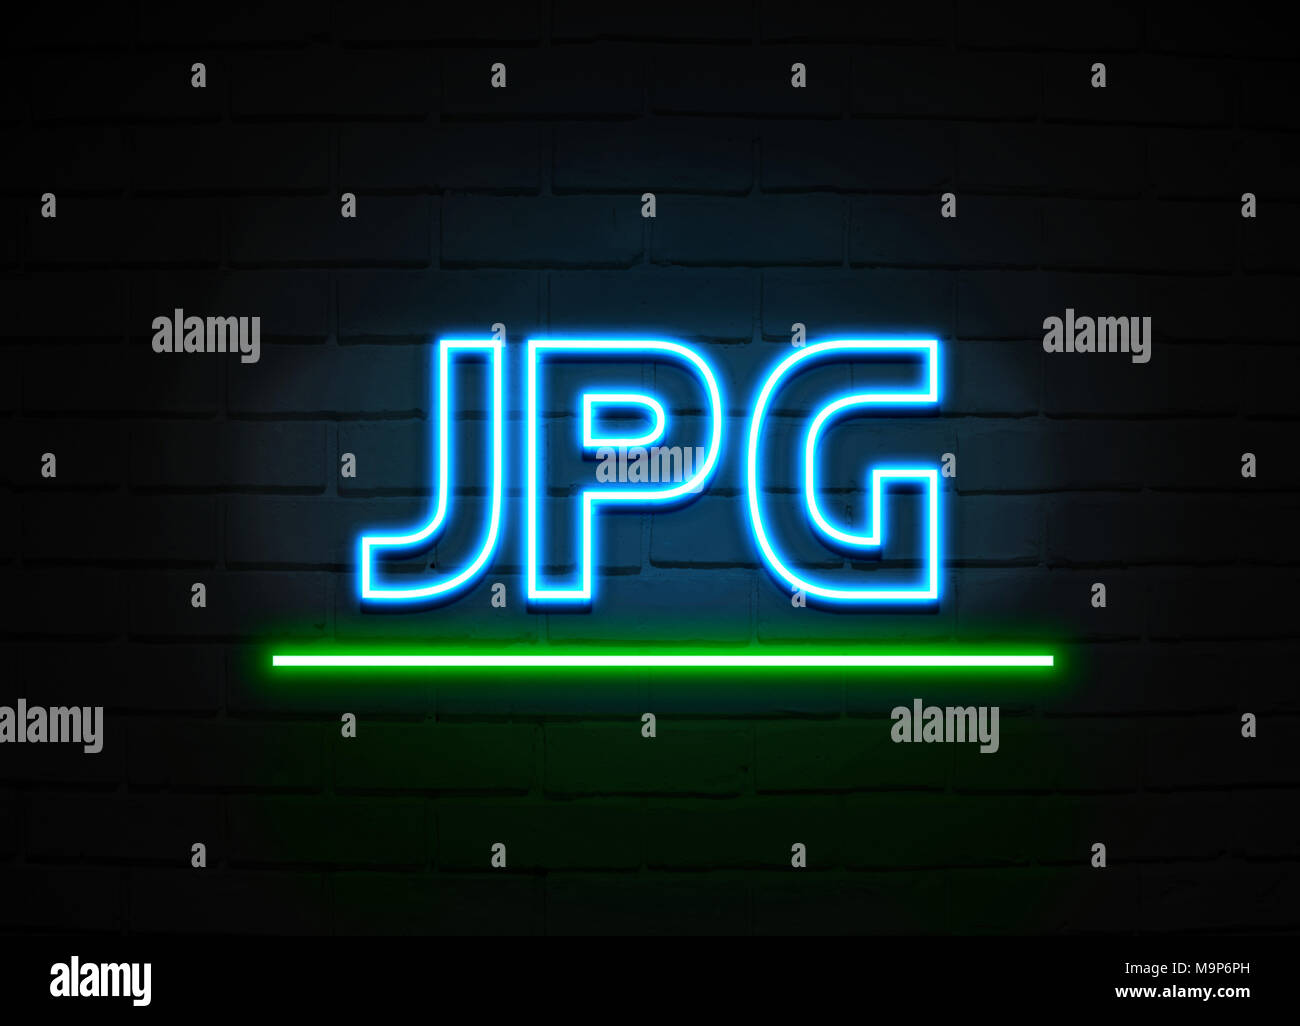 Jpg neon sign - Glowing Neon Sign on brickwall wall - 3D rendered royalty free stock illustration. Stock Photo